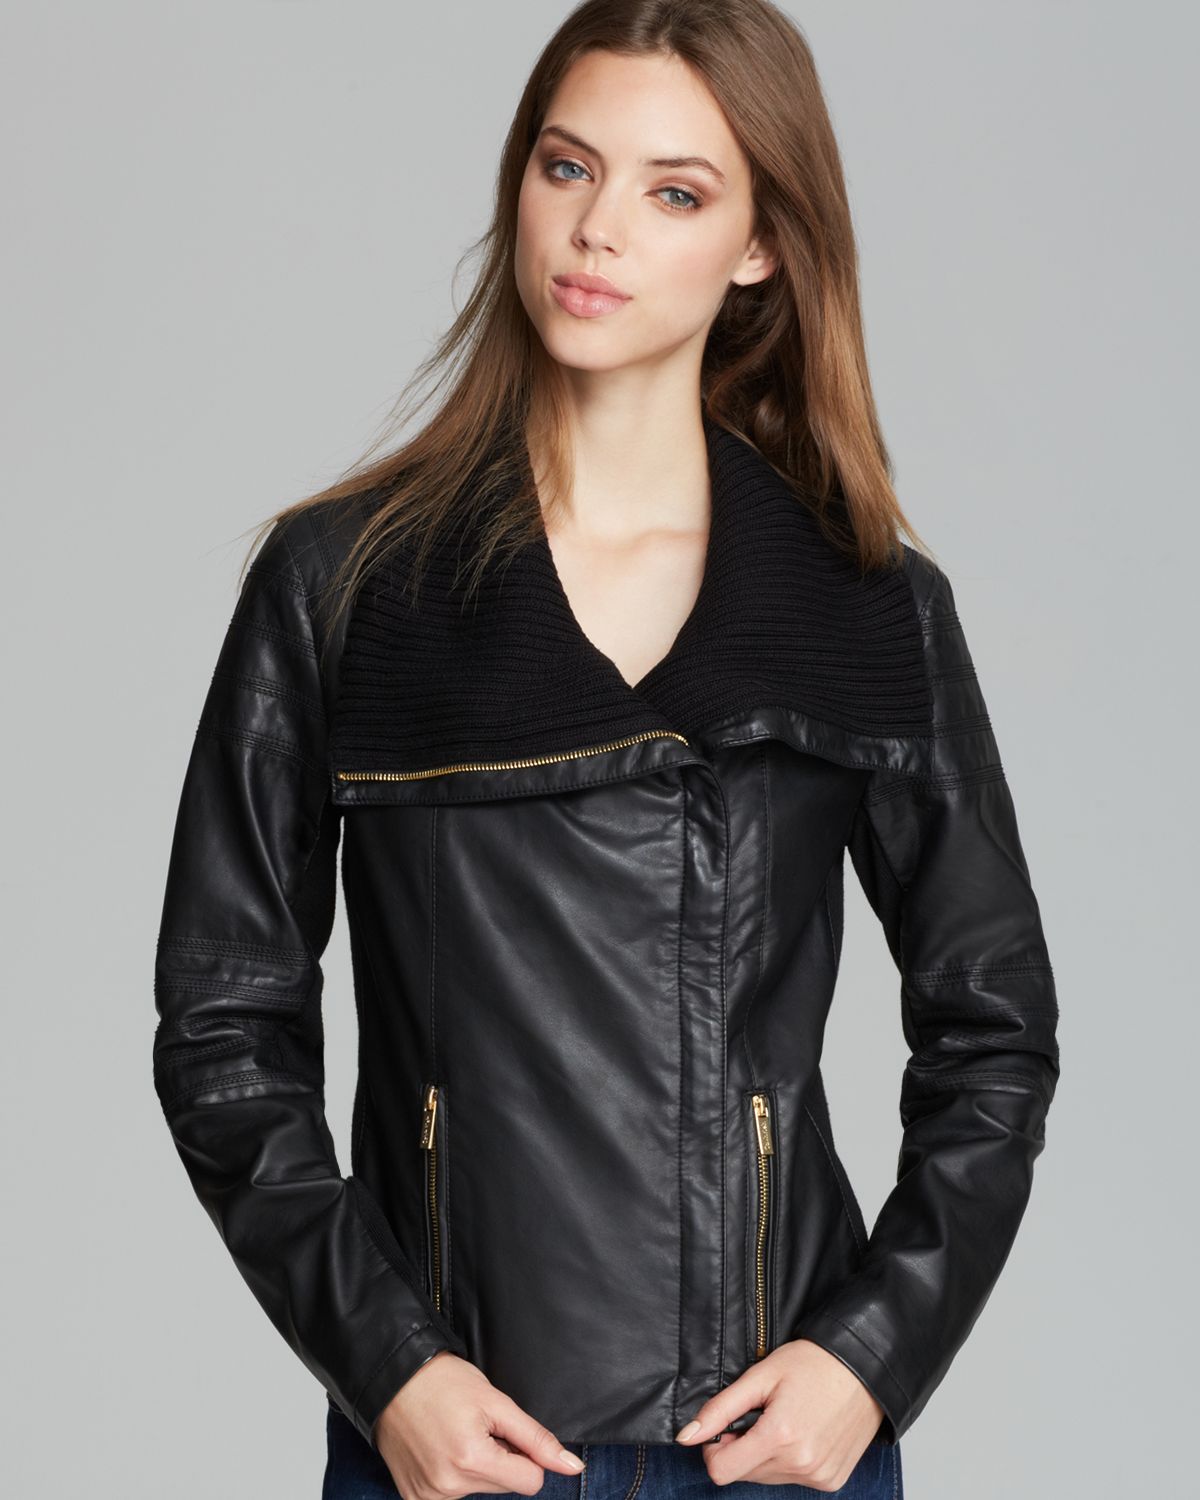 Lyst - Calvin Klein Faux Leather Motorcycle Jacket in Black